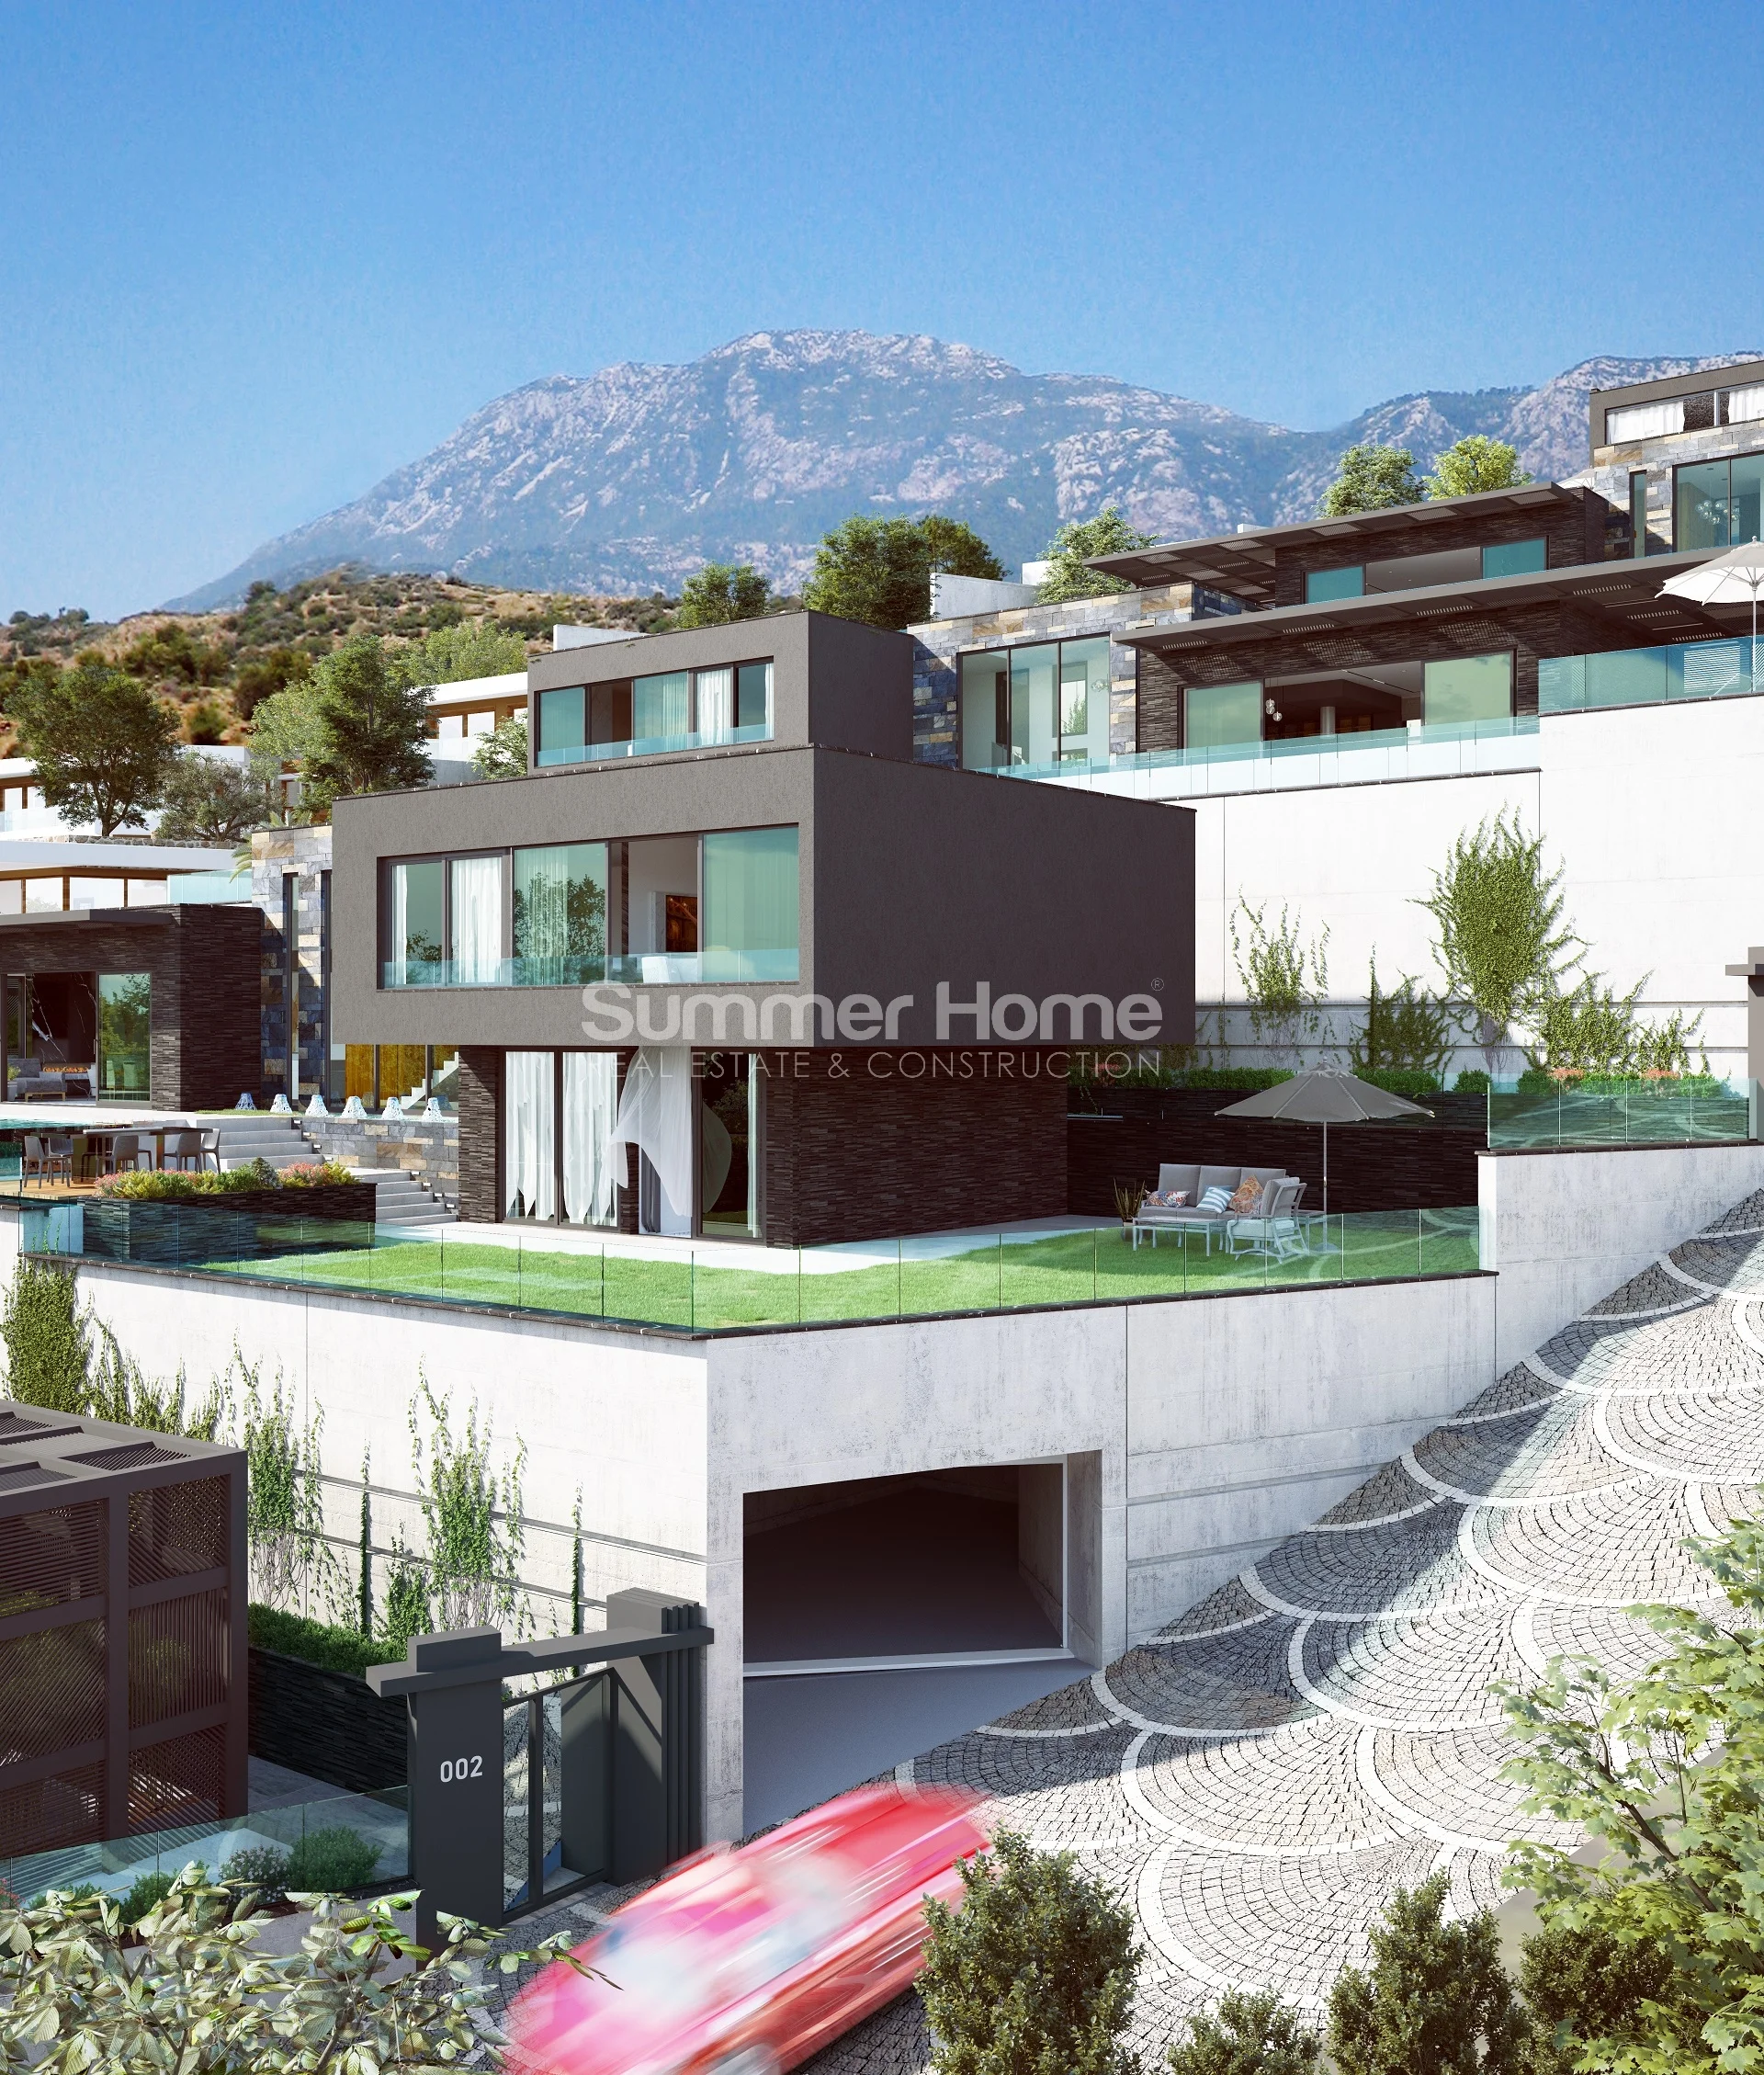 Private & luxurious villas on the hills of Bektas district General - 4